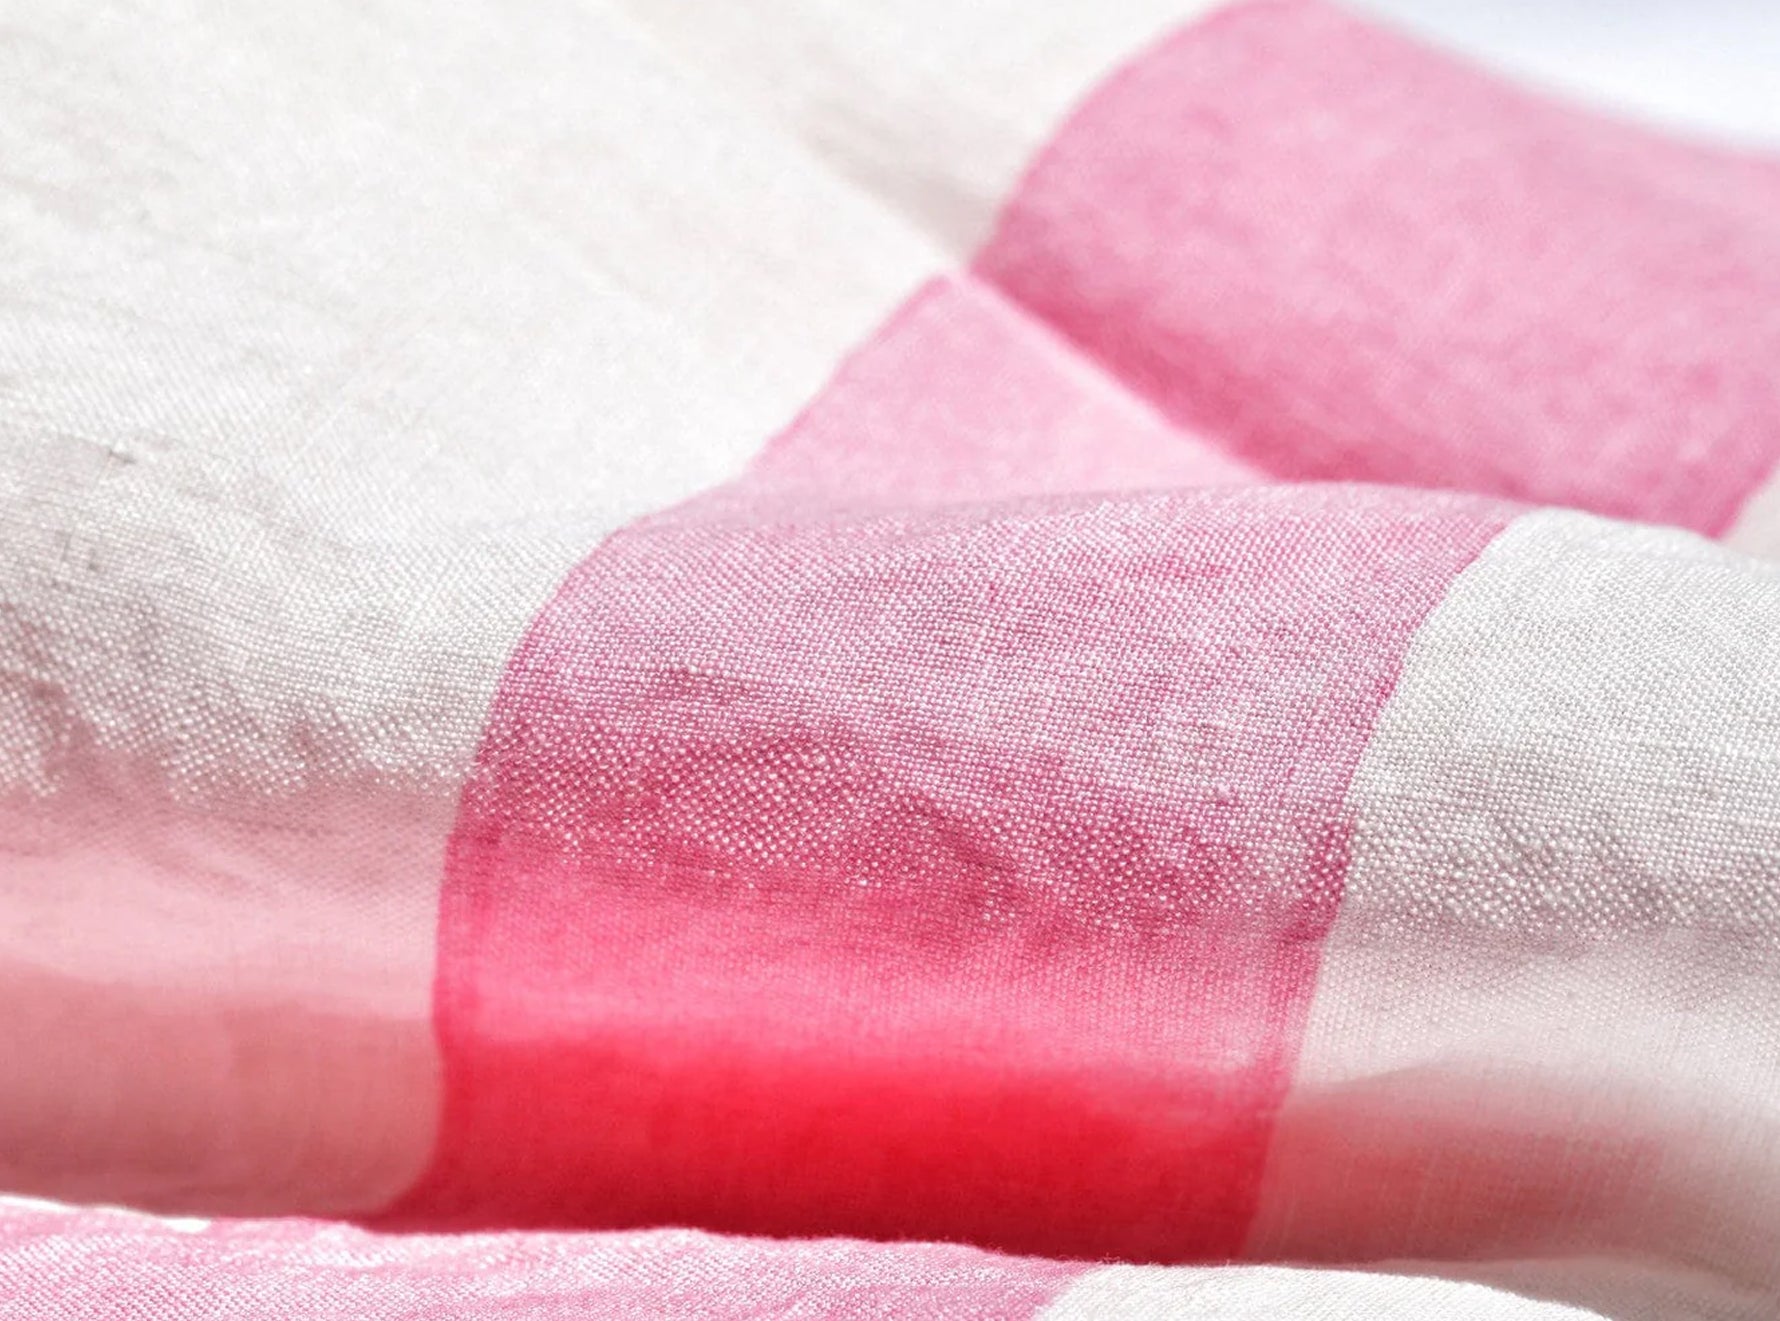 Cornice Linen Tablecloth in Rose Pink